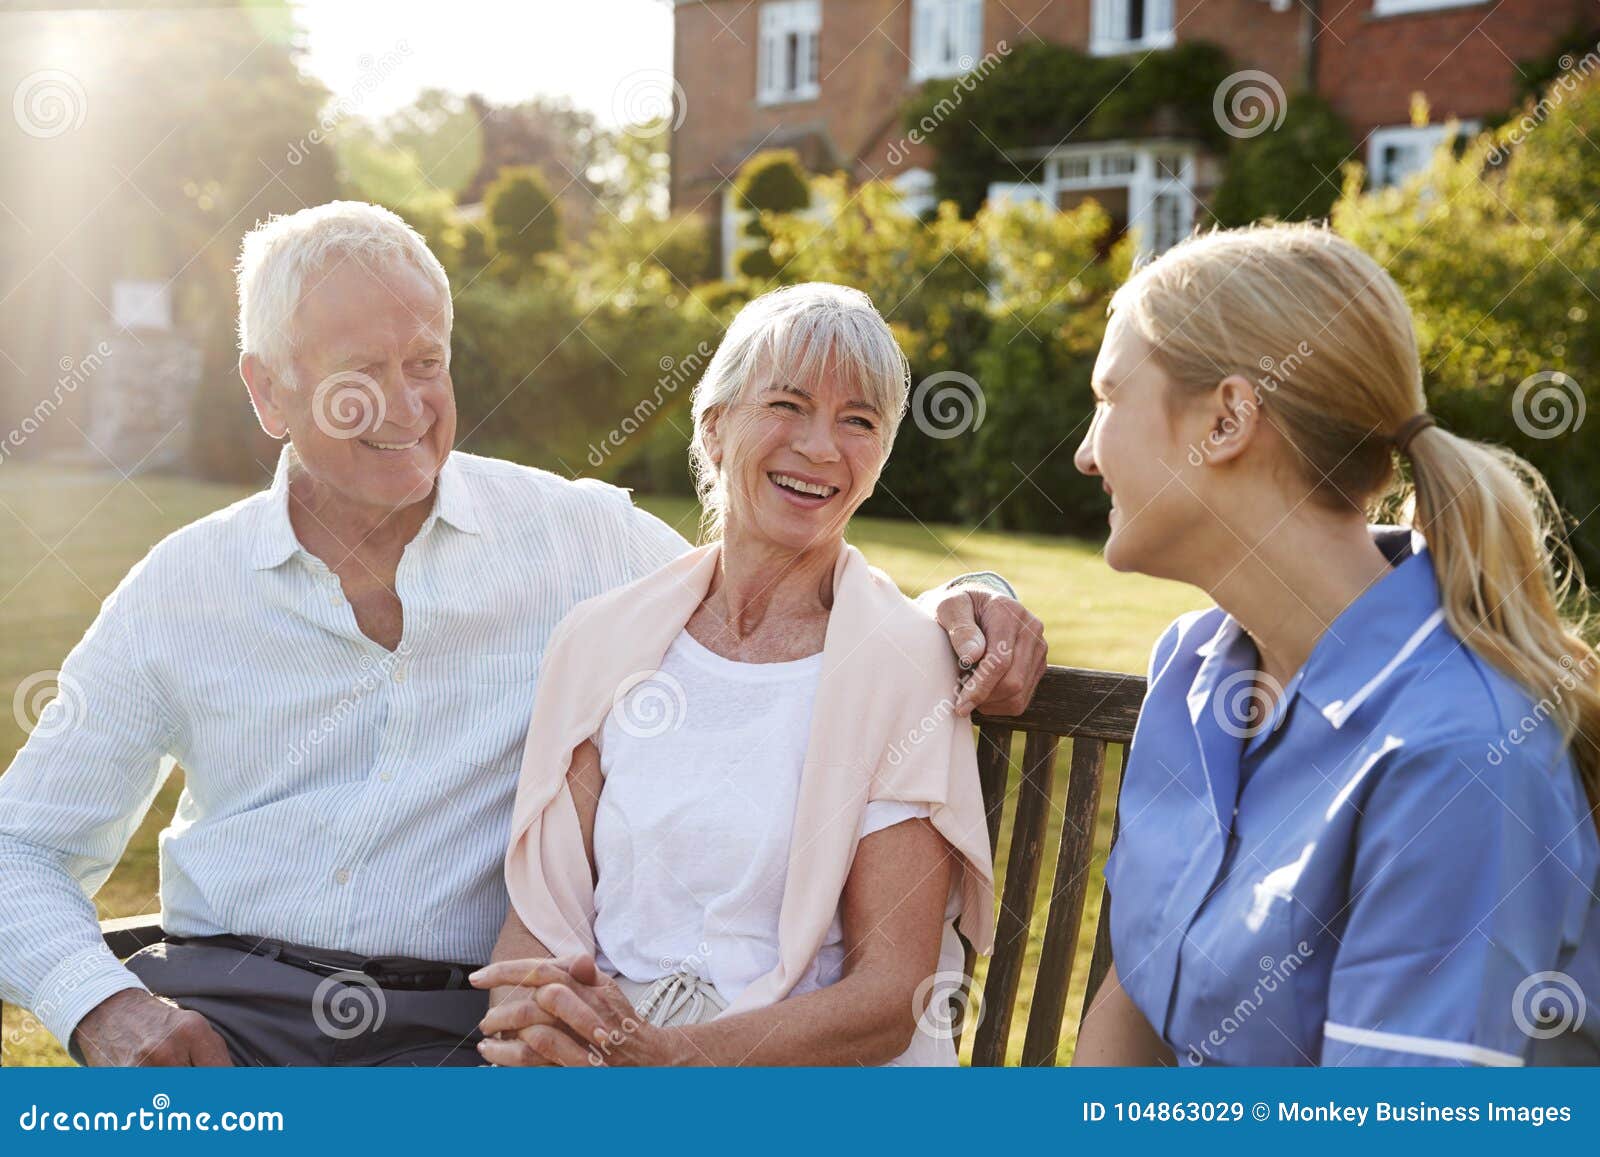 nurse talking to senior couple in residential care home